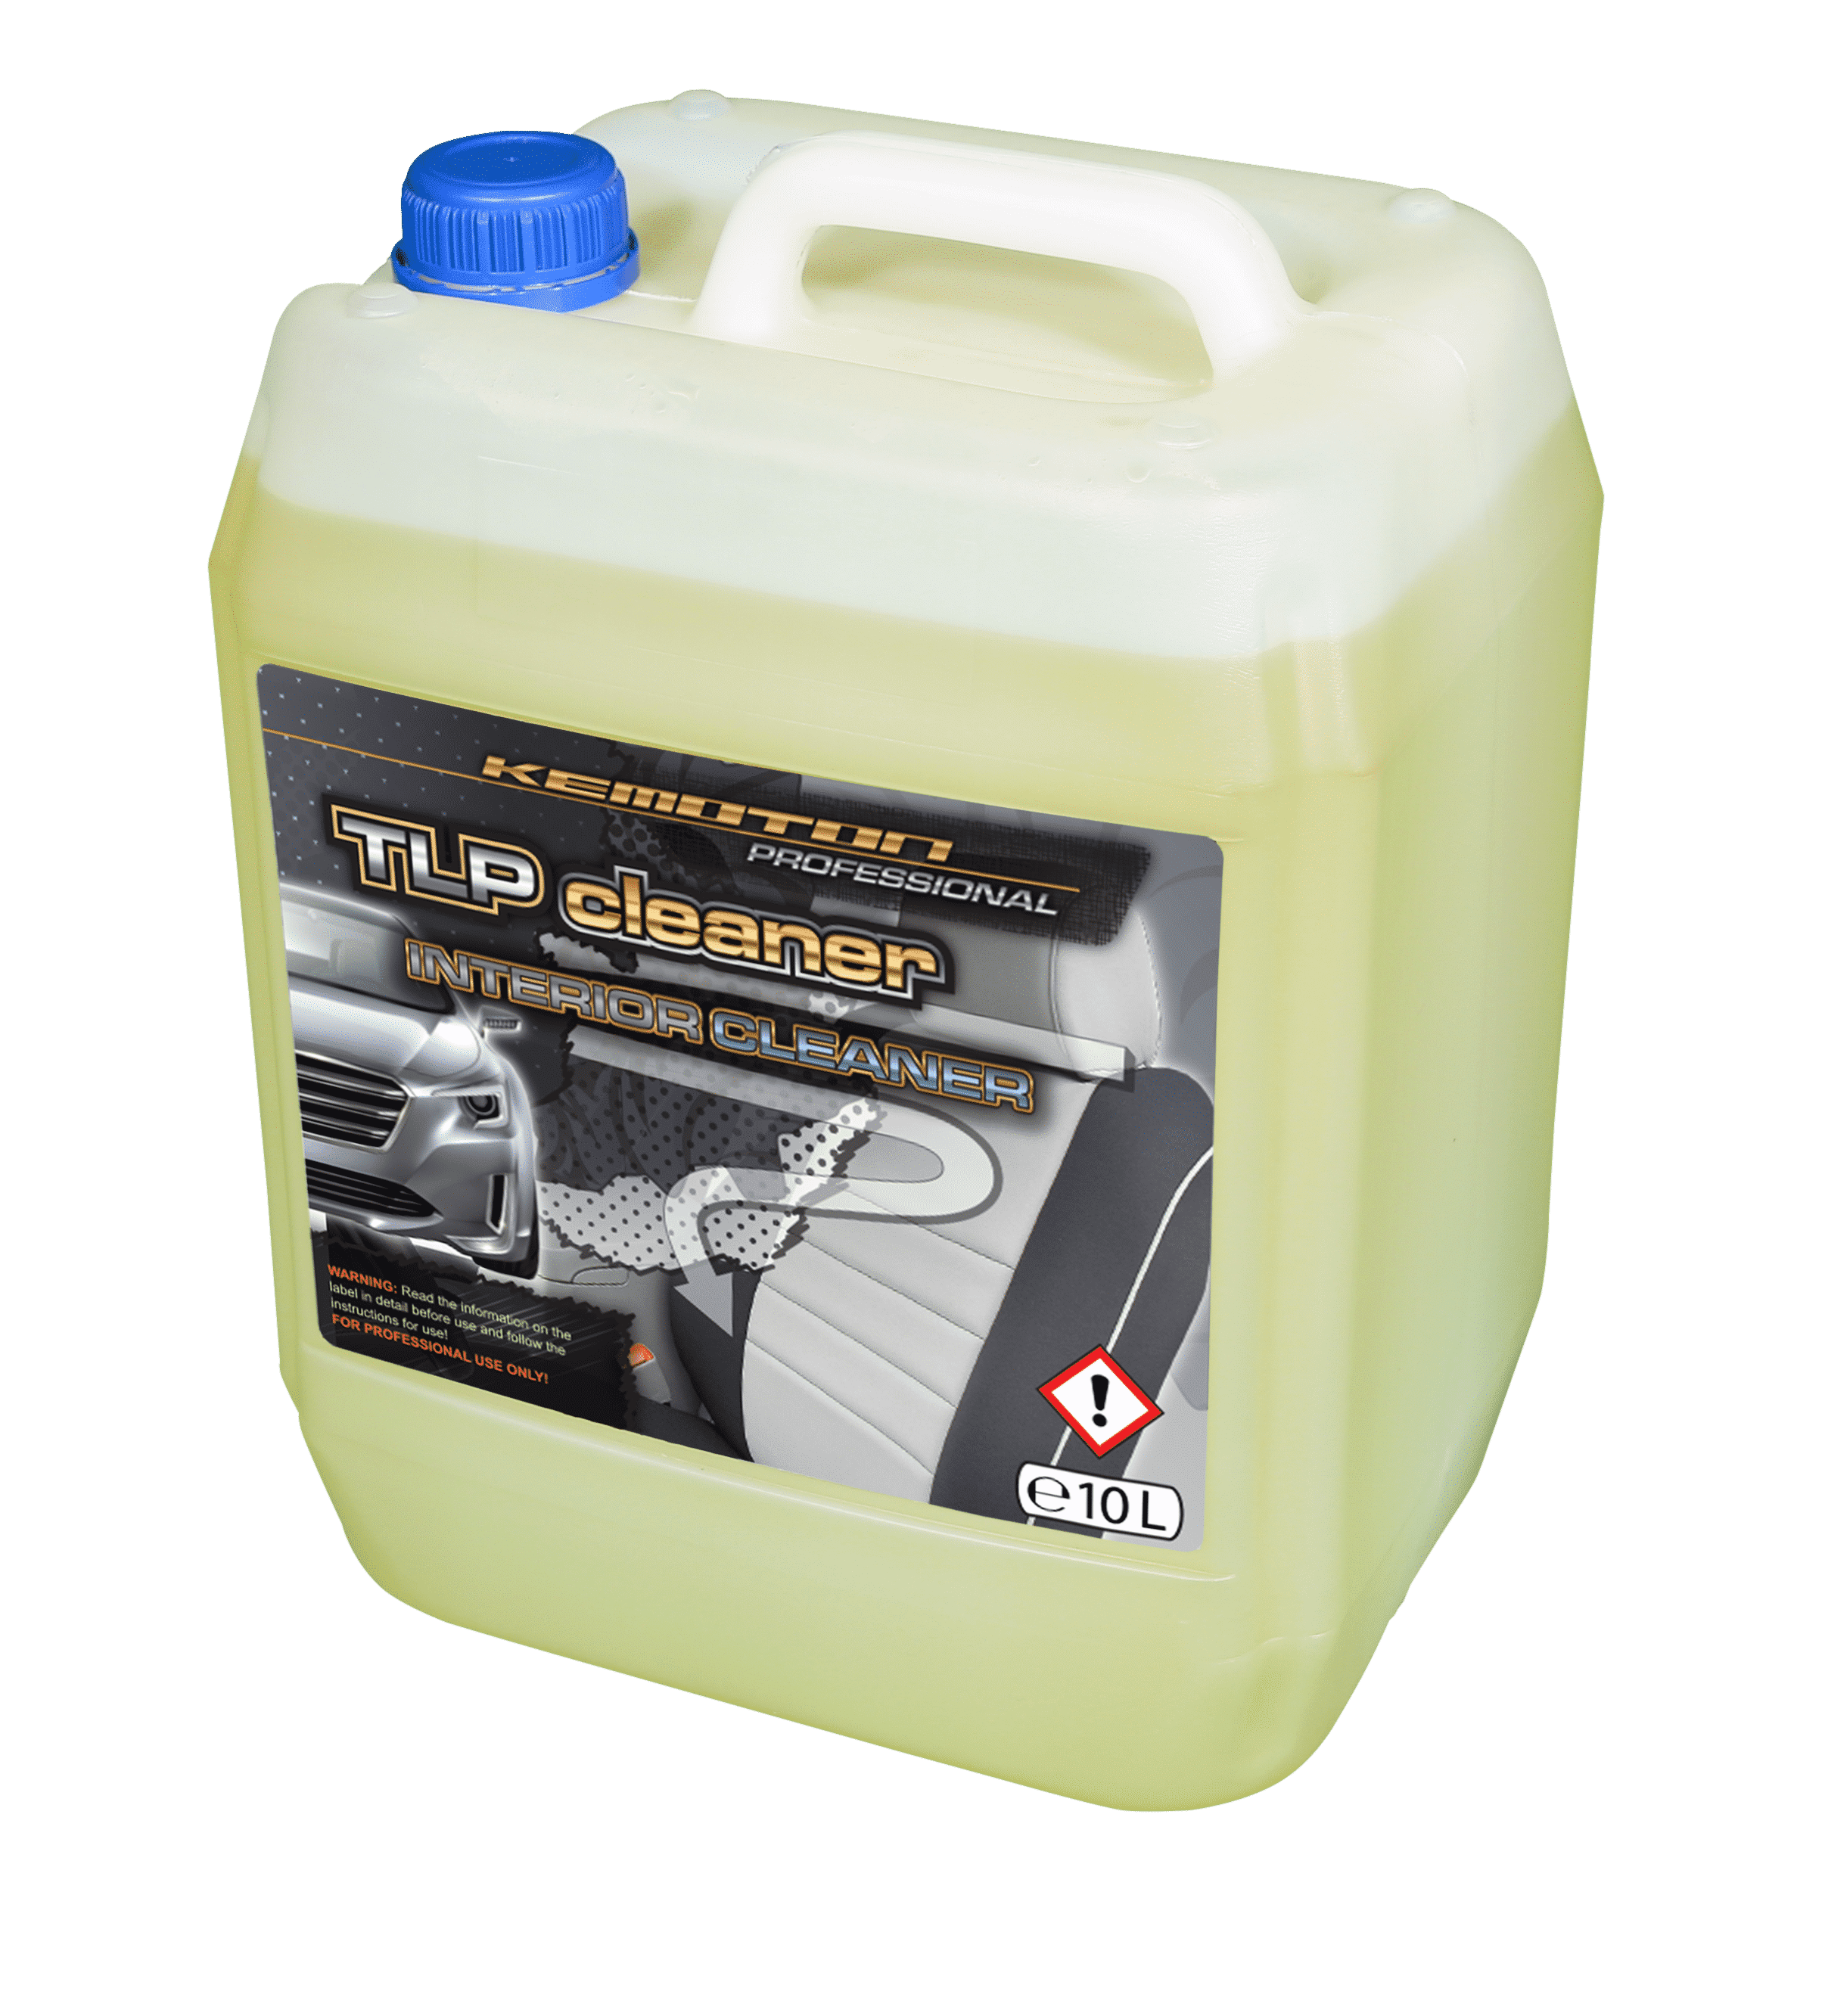 Leather & Plastic Cleaner